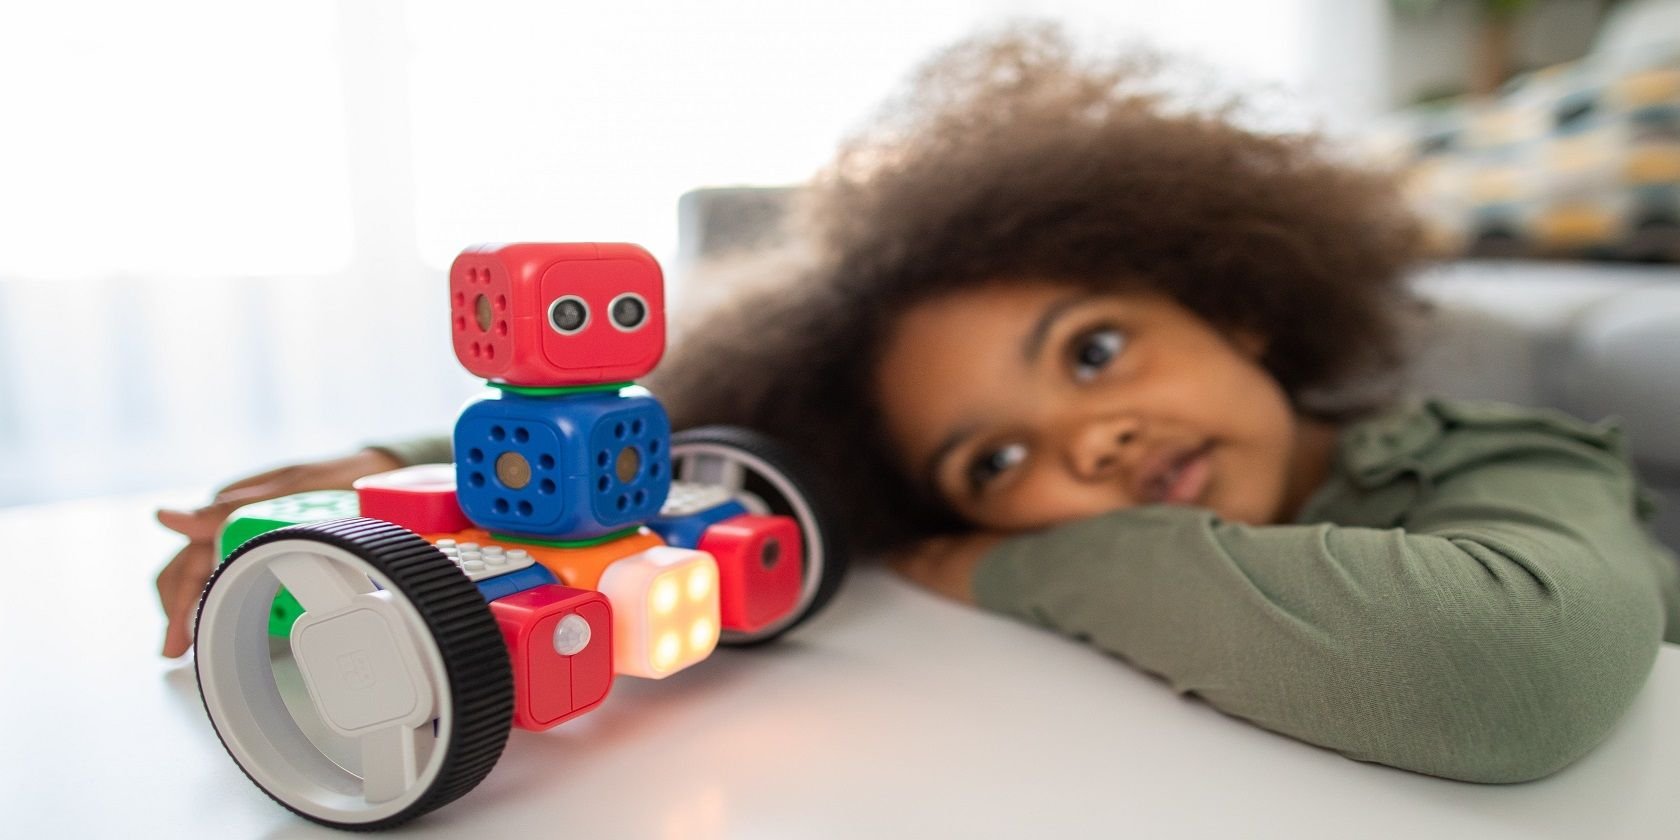 8 Awesome Intermediate Robotics Projects Students Can Try at School